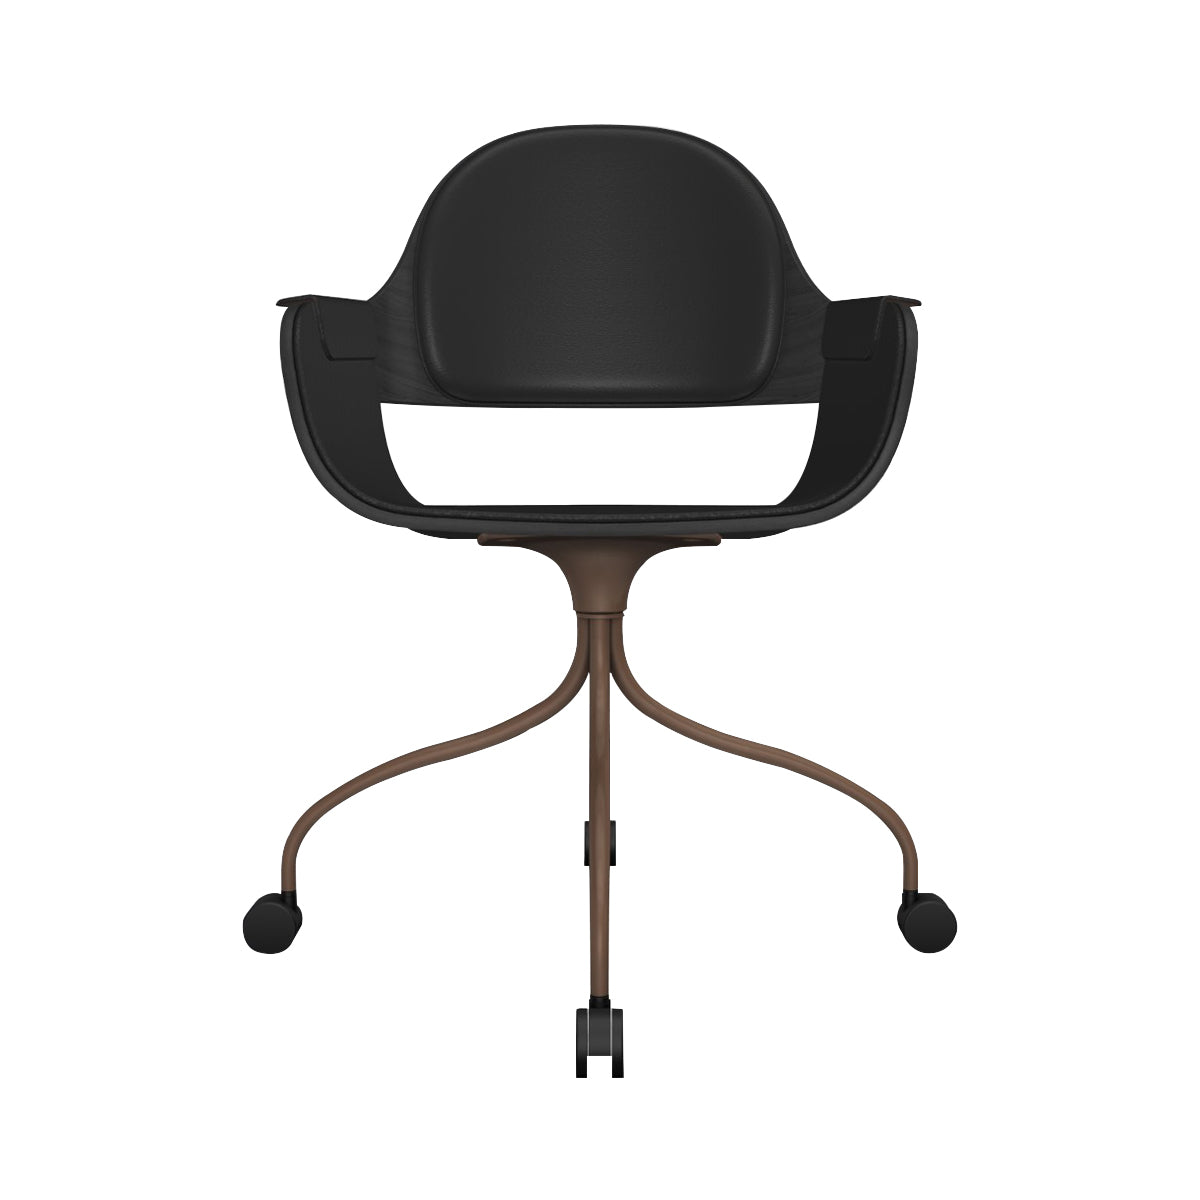 Showtime Nude Chair with Wheel: Interior Seat + Backrest Cushion + Ash Stained Black + Pale Brown